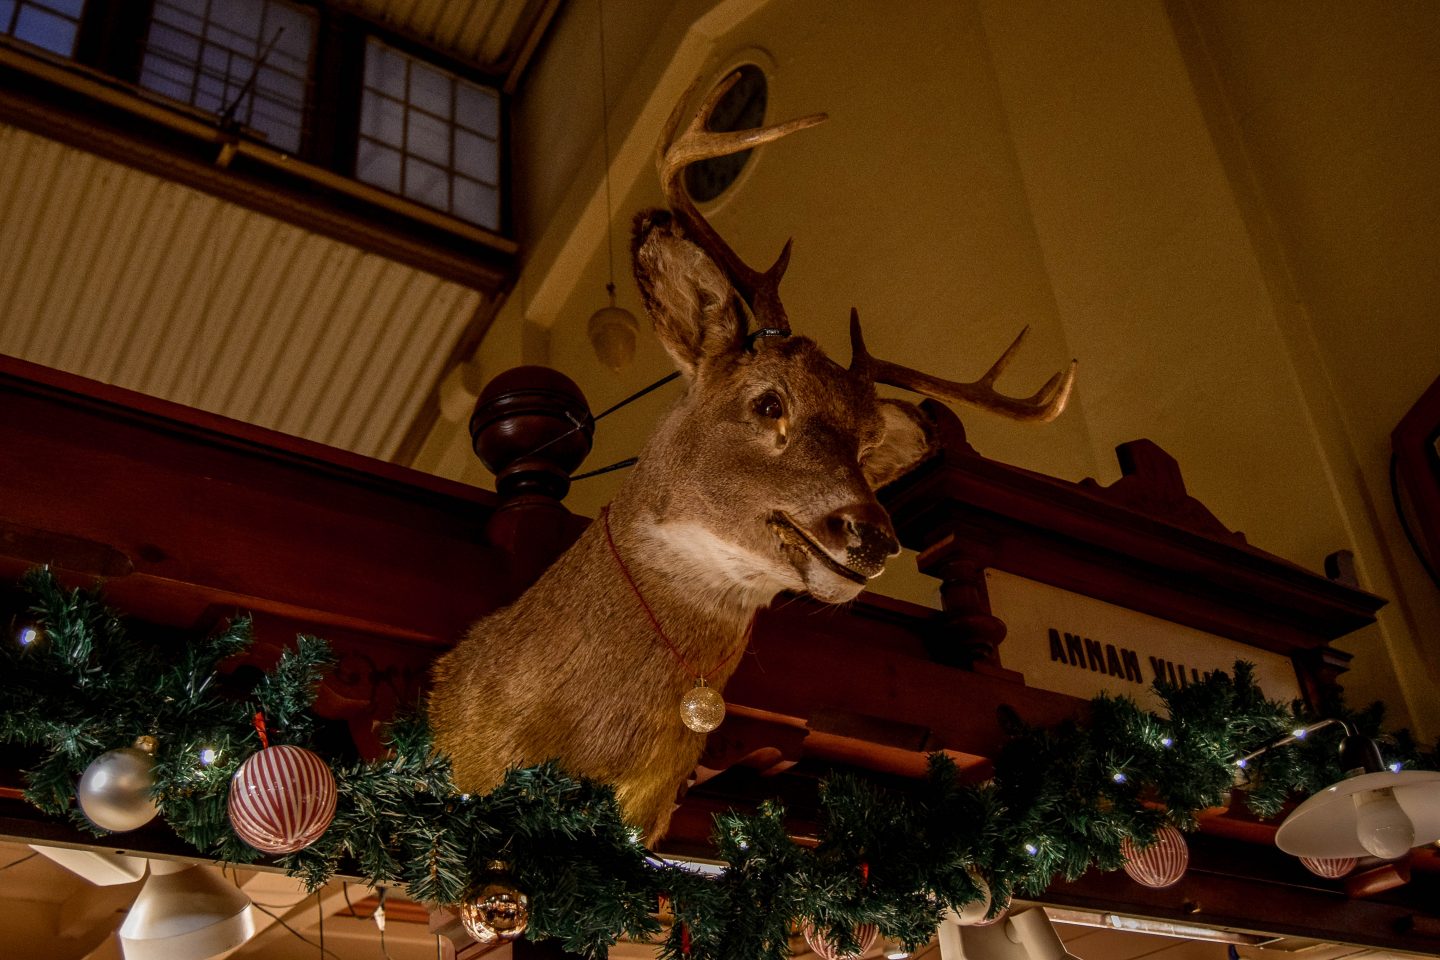 A deer head with a Christmas wreath below it mounted to a market stall.